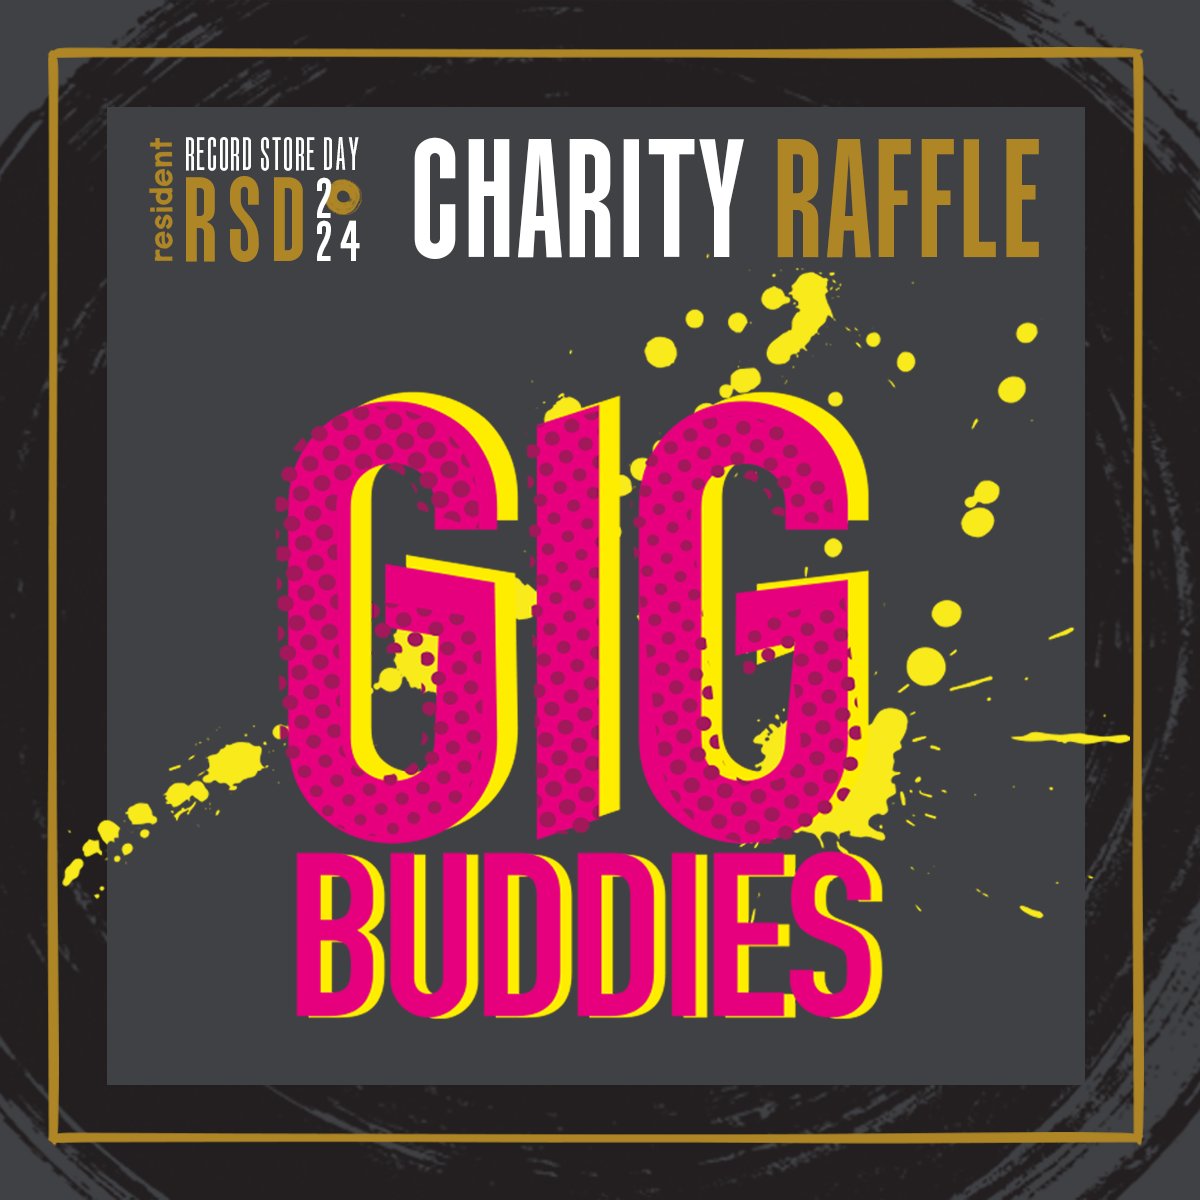 @RSDUK @RicherSounds @lovesupremefest @btnpsychfest @FaberBooks @chalkvenue @CommunionMusic @greendoorstore @formpresents @LasgoOfficial @heavenlyrecs All money raised from the raffle will go to @gigbuddies   who do incredible work assisting people with disabilities in getting to see live music.

Read more about Gig Buddies incredible work here: gigbuddies.org.uk.

P.S. Don't forget, you'll need to be here in person at…